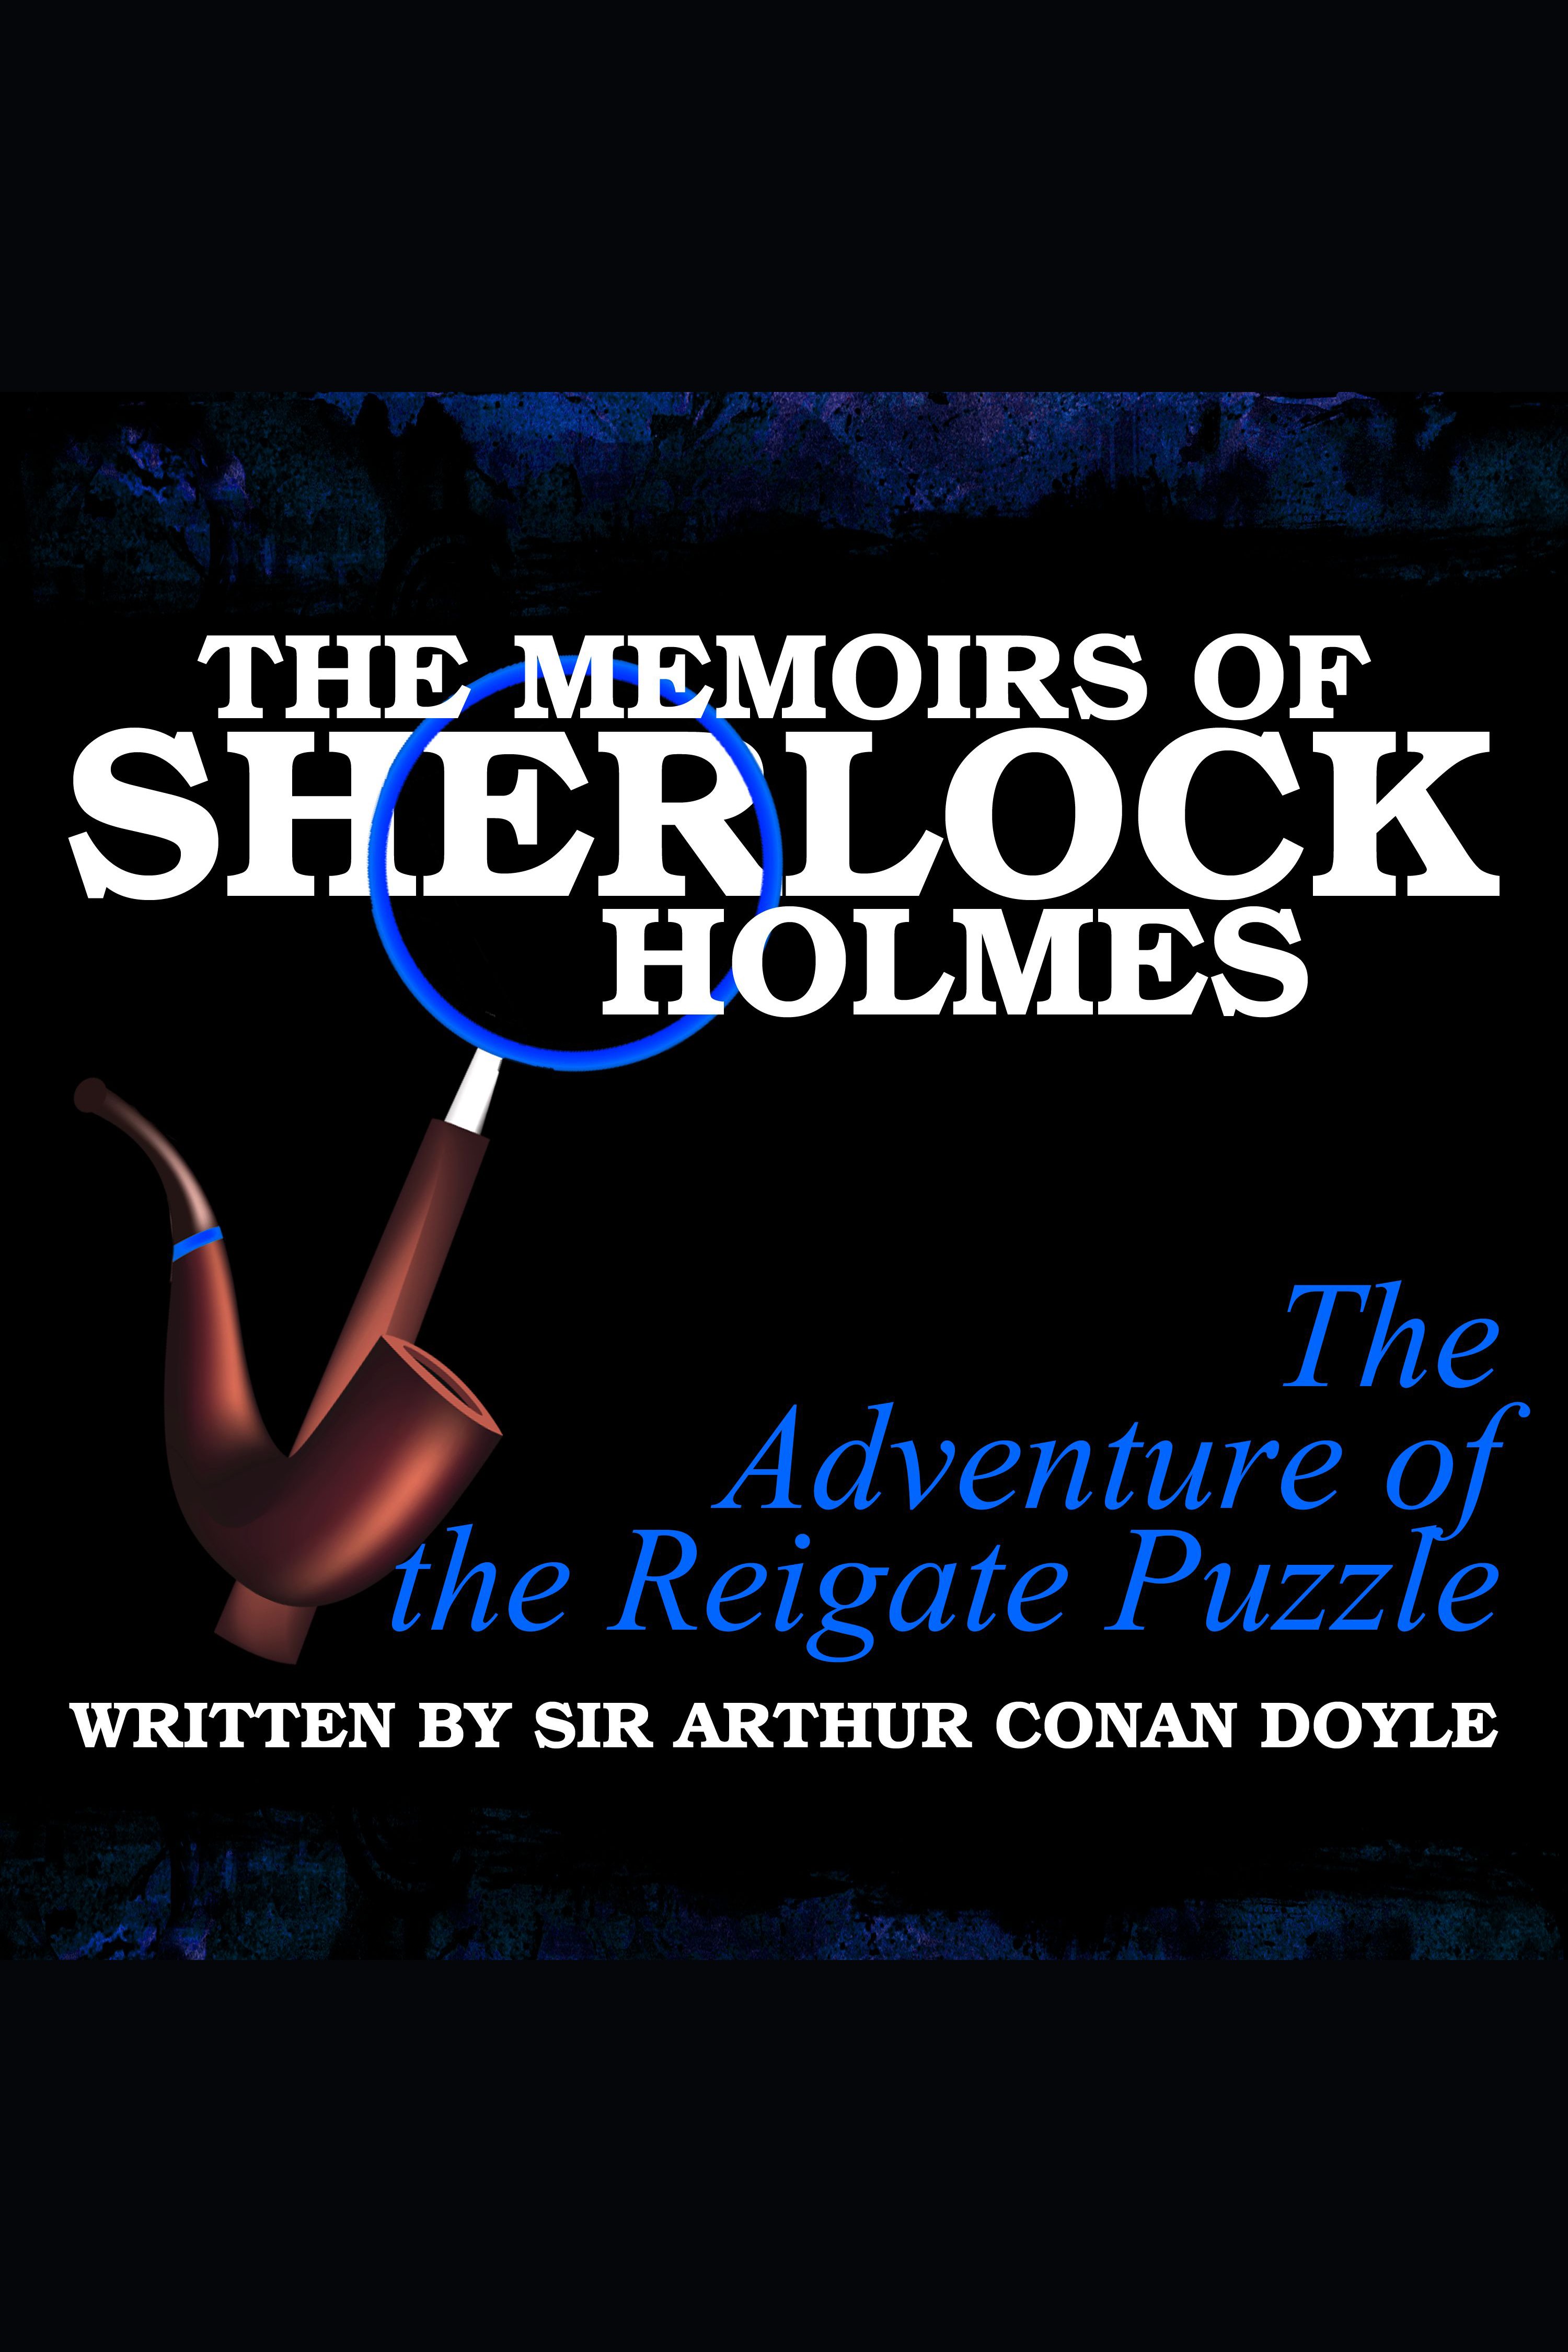 The Memoirs of Sherlock Holmes - The Adventure of the Reigate Puzzle cover image